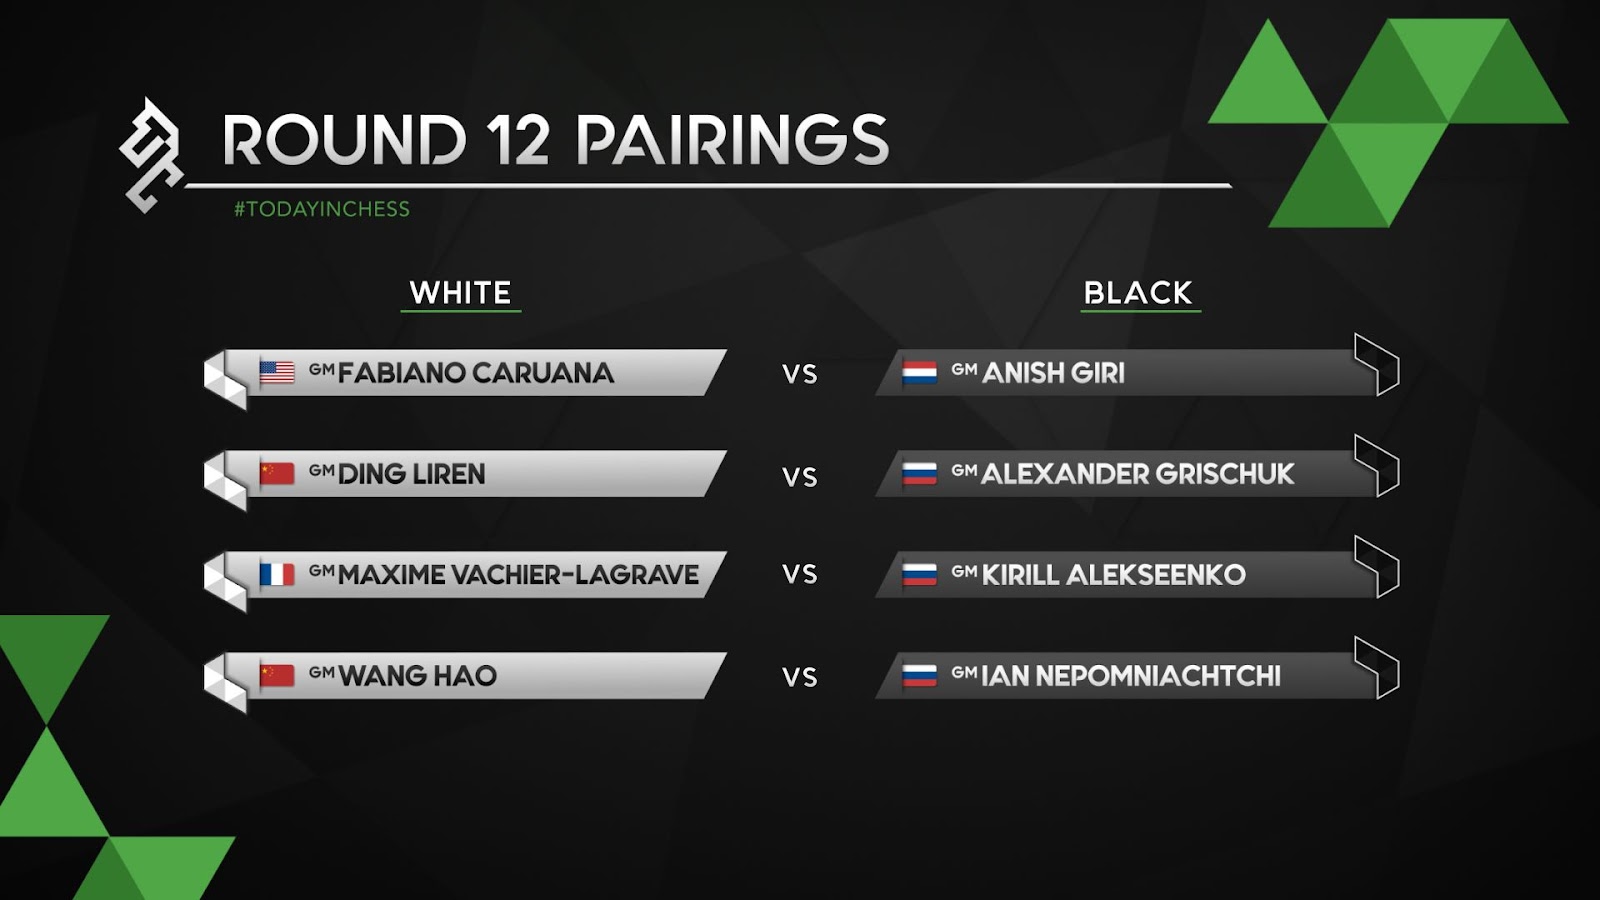 Round 11 pairings. Ian Nepomniachtchi will be playing black